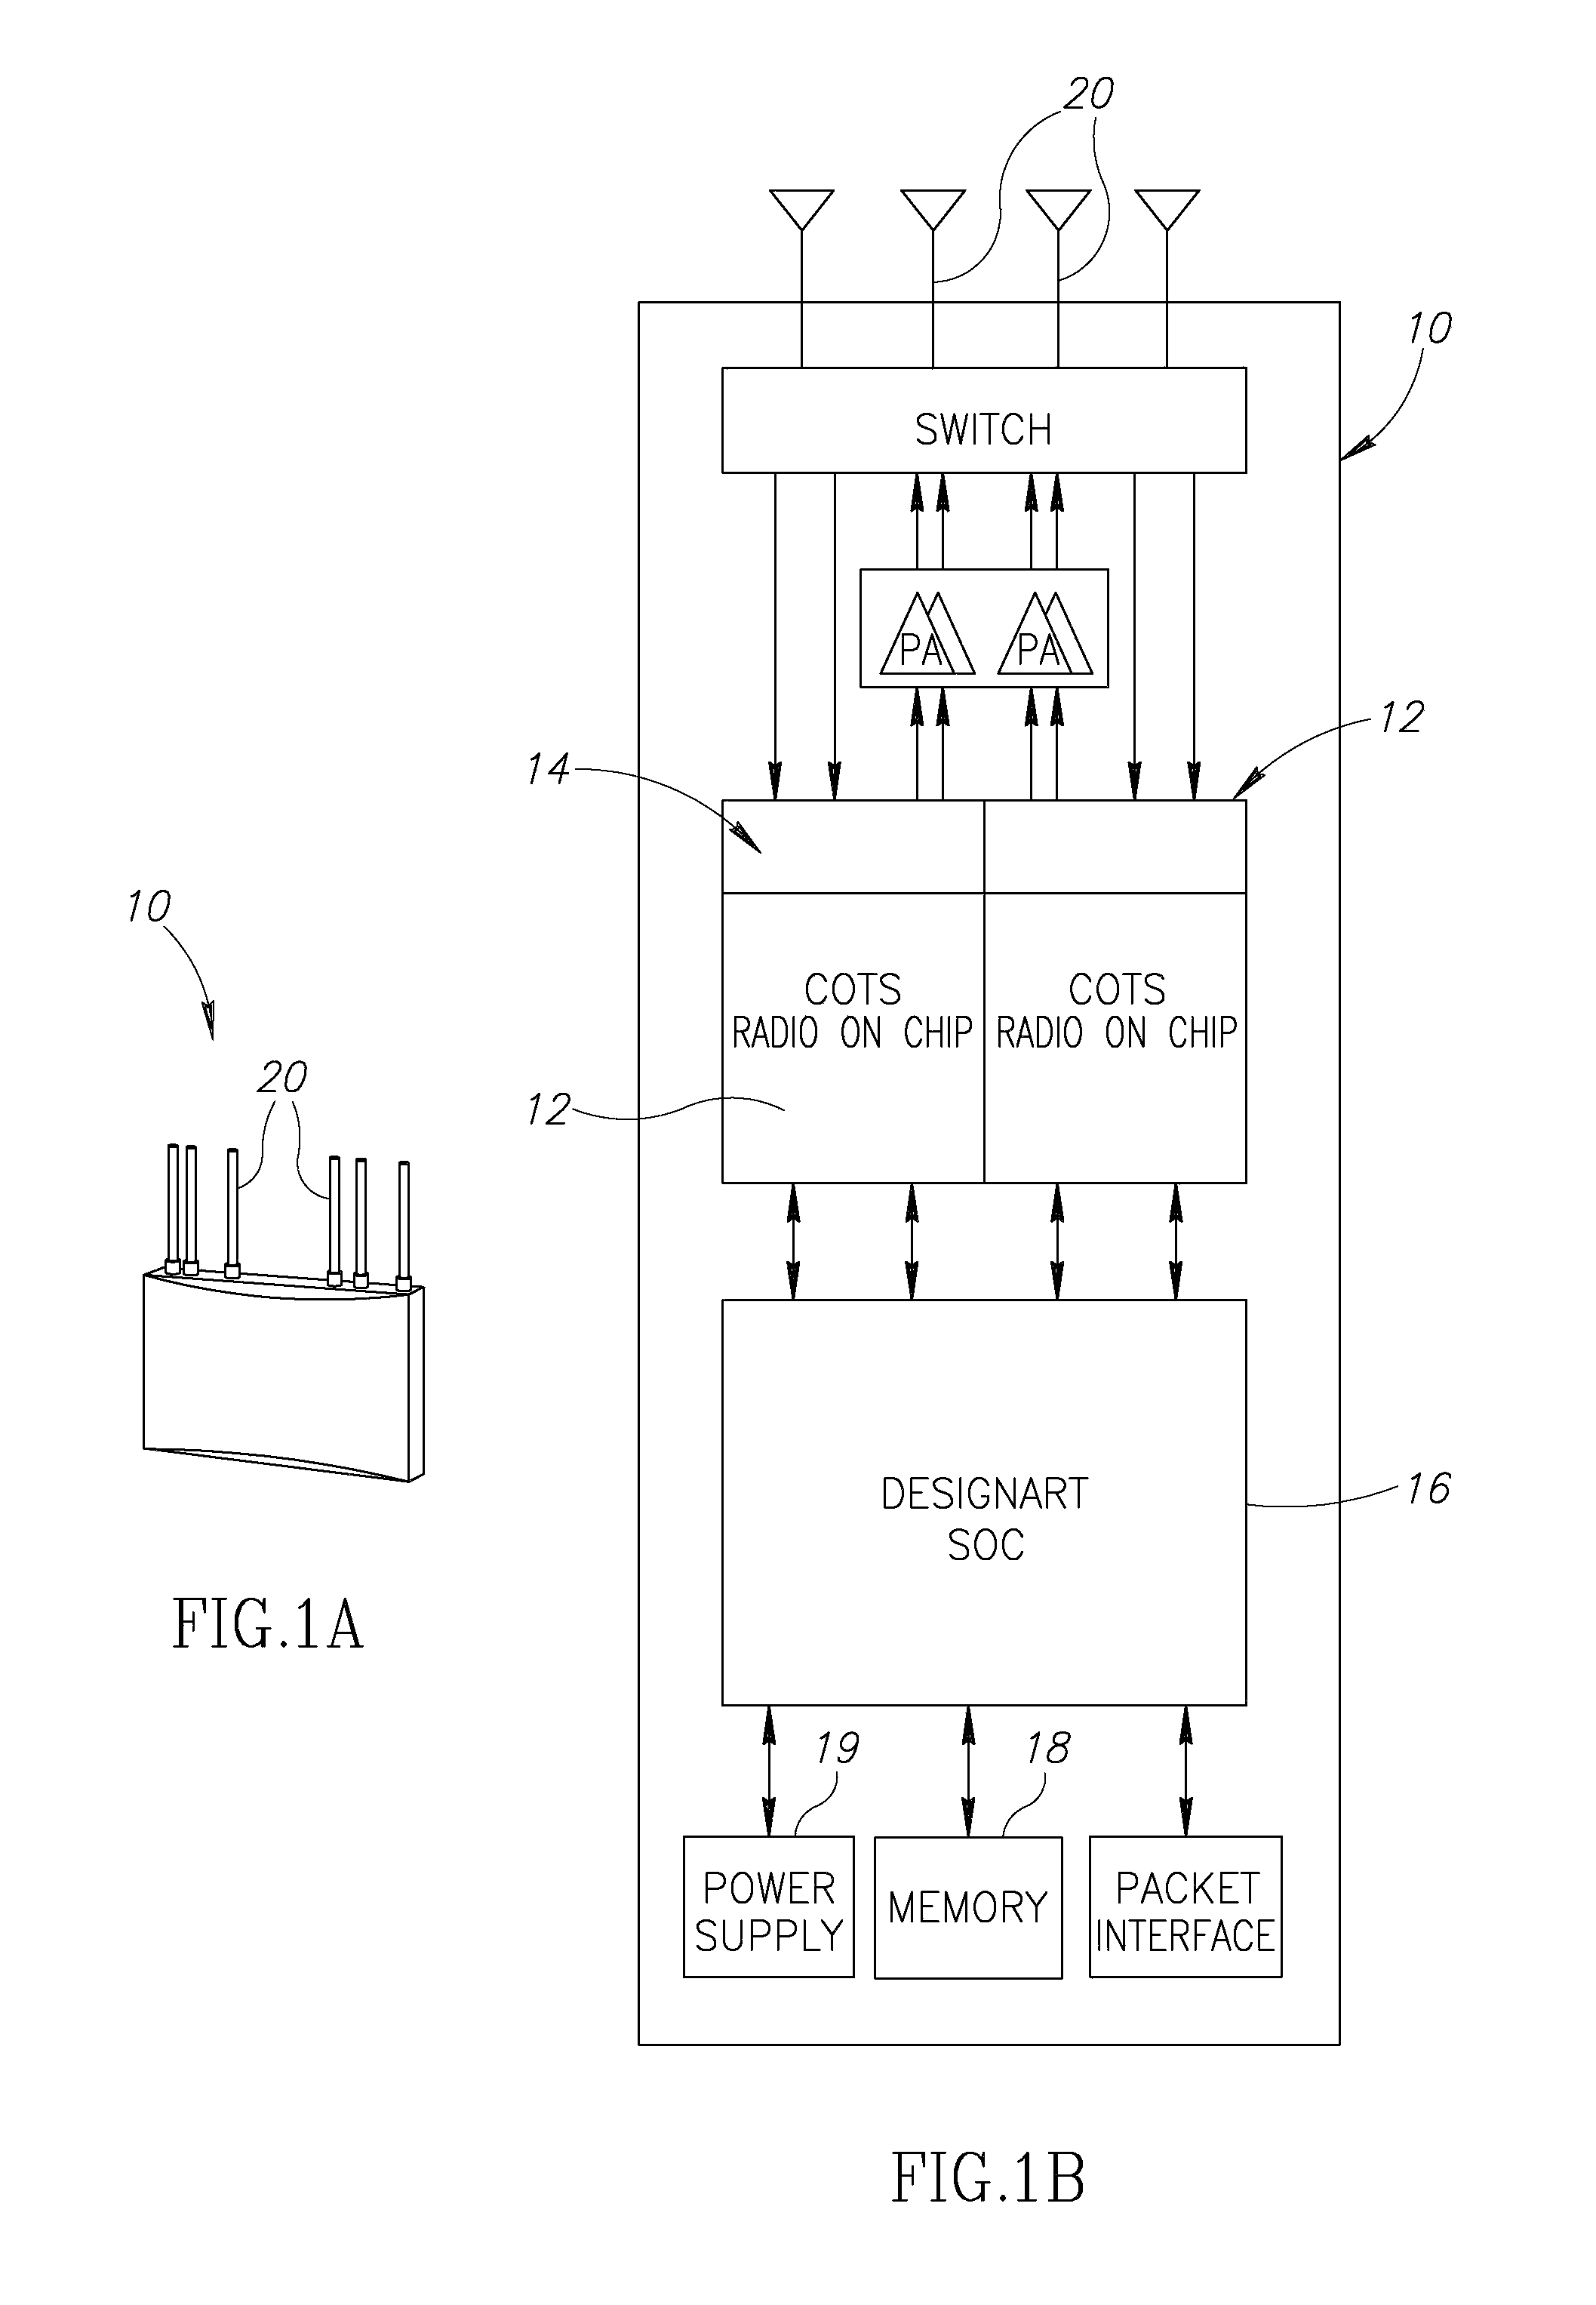 Mobile broadband wireless network with interference mitigation mechanism to minimize interference within a cluster during multiple concurrent transmissions